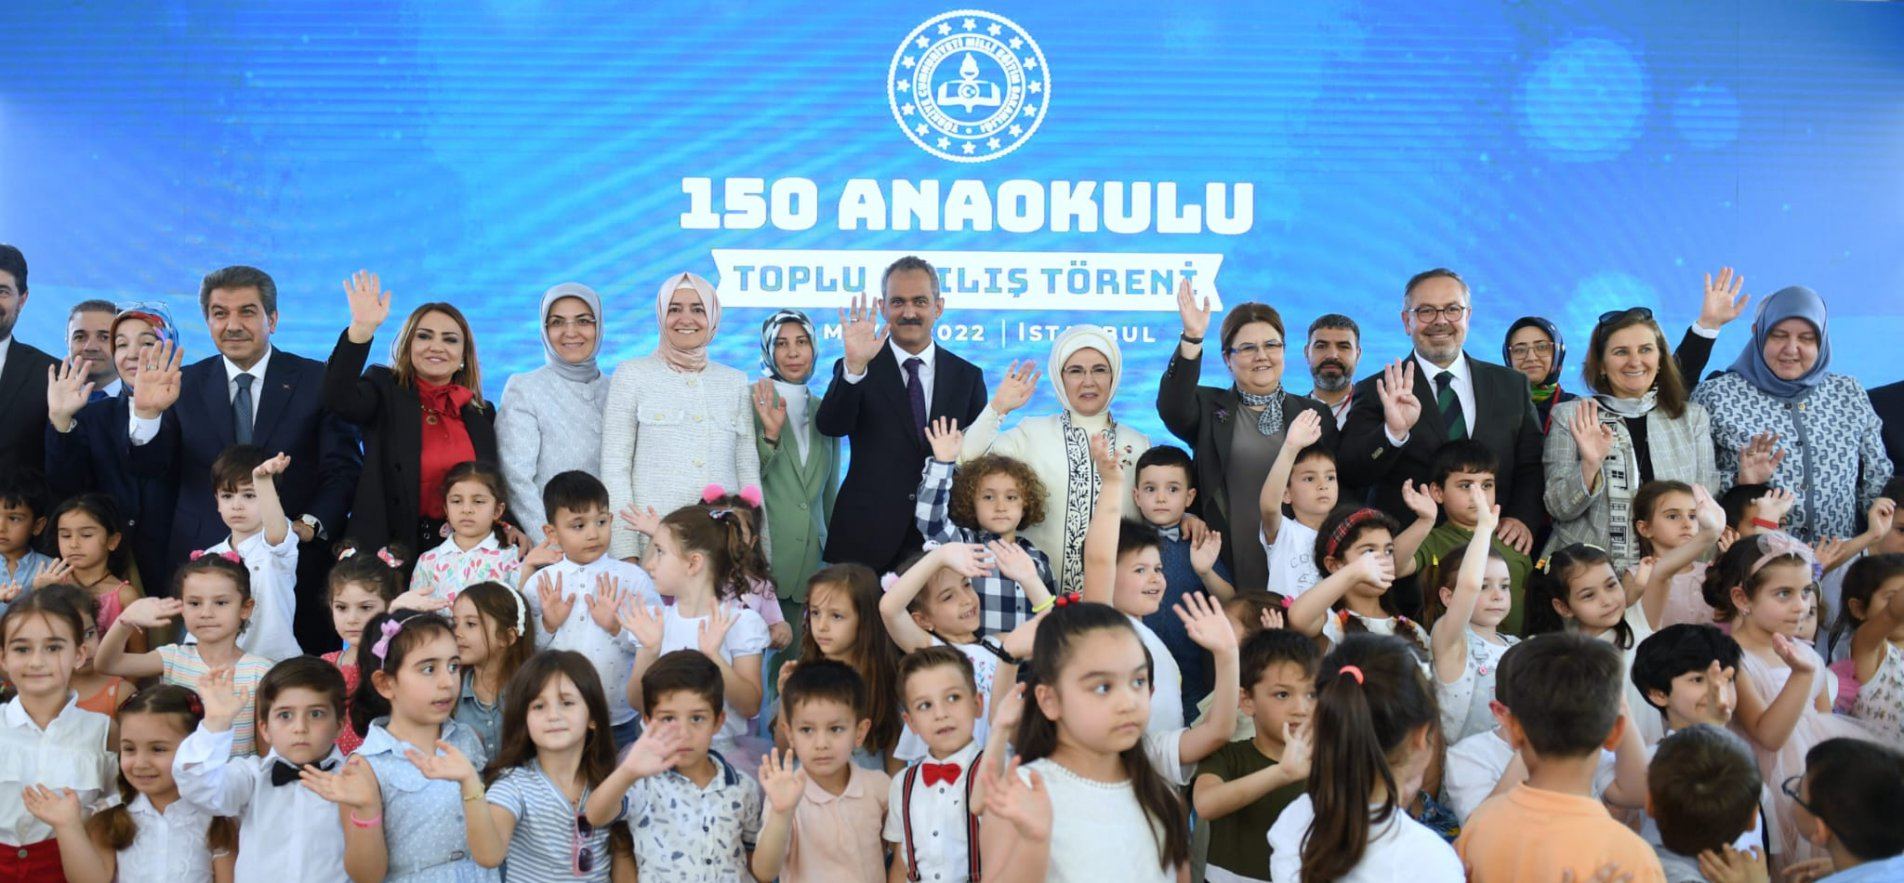 INAUGURATION CEREMONY OF 150 KINDERGARTENS HELD IN İSTANBUL